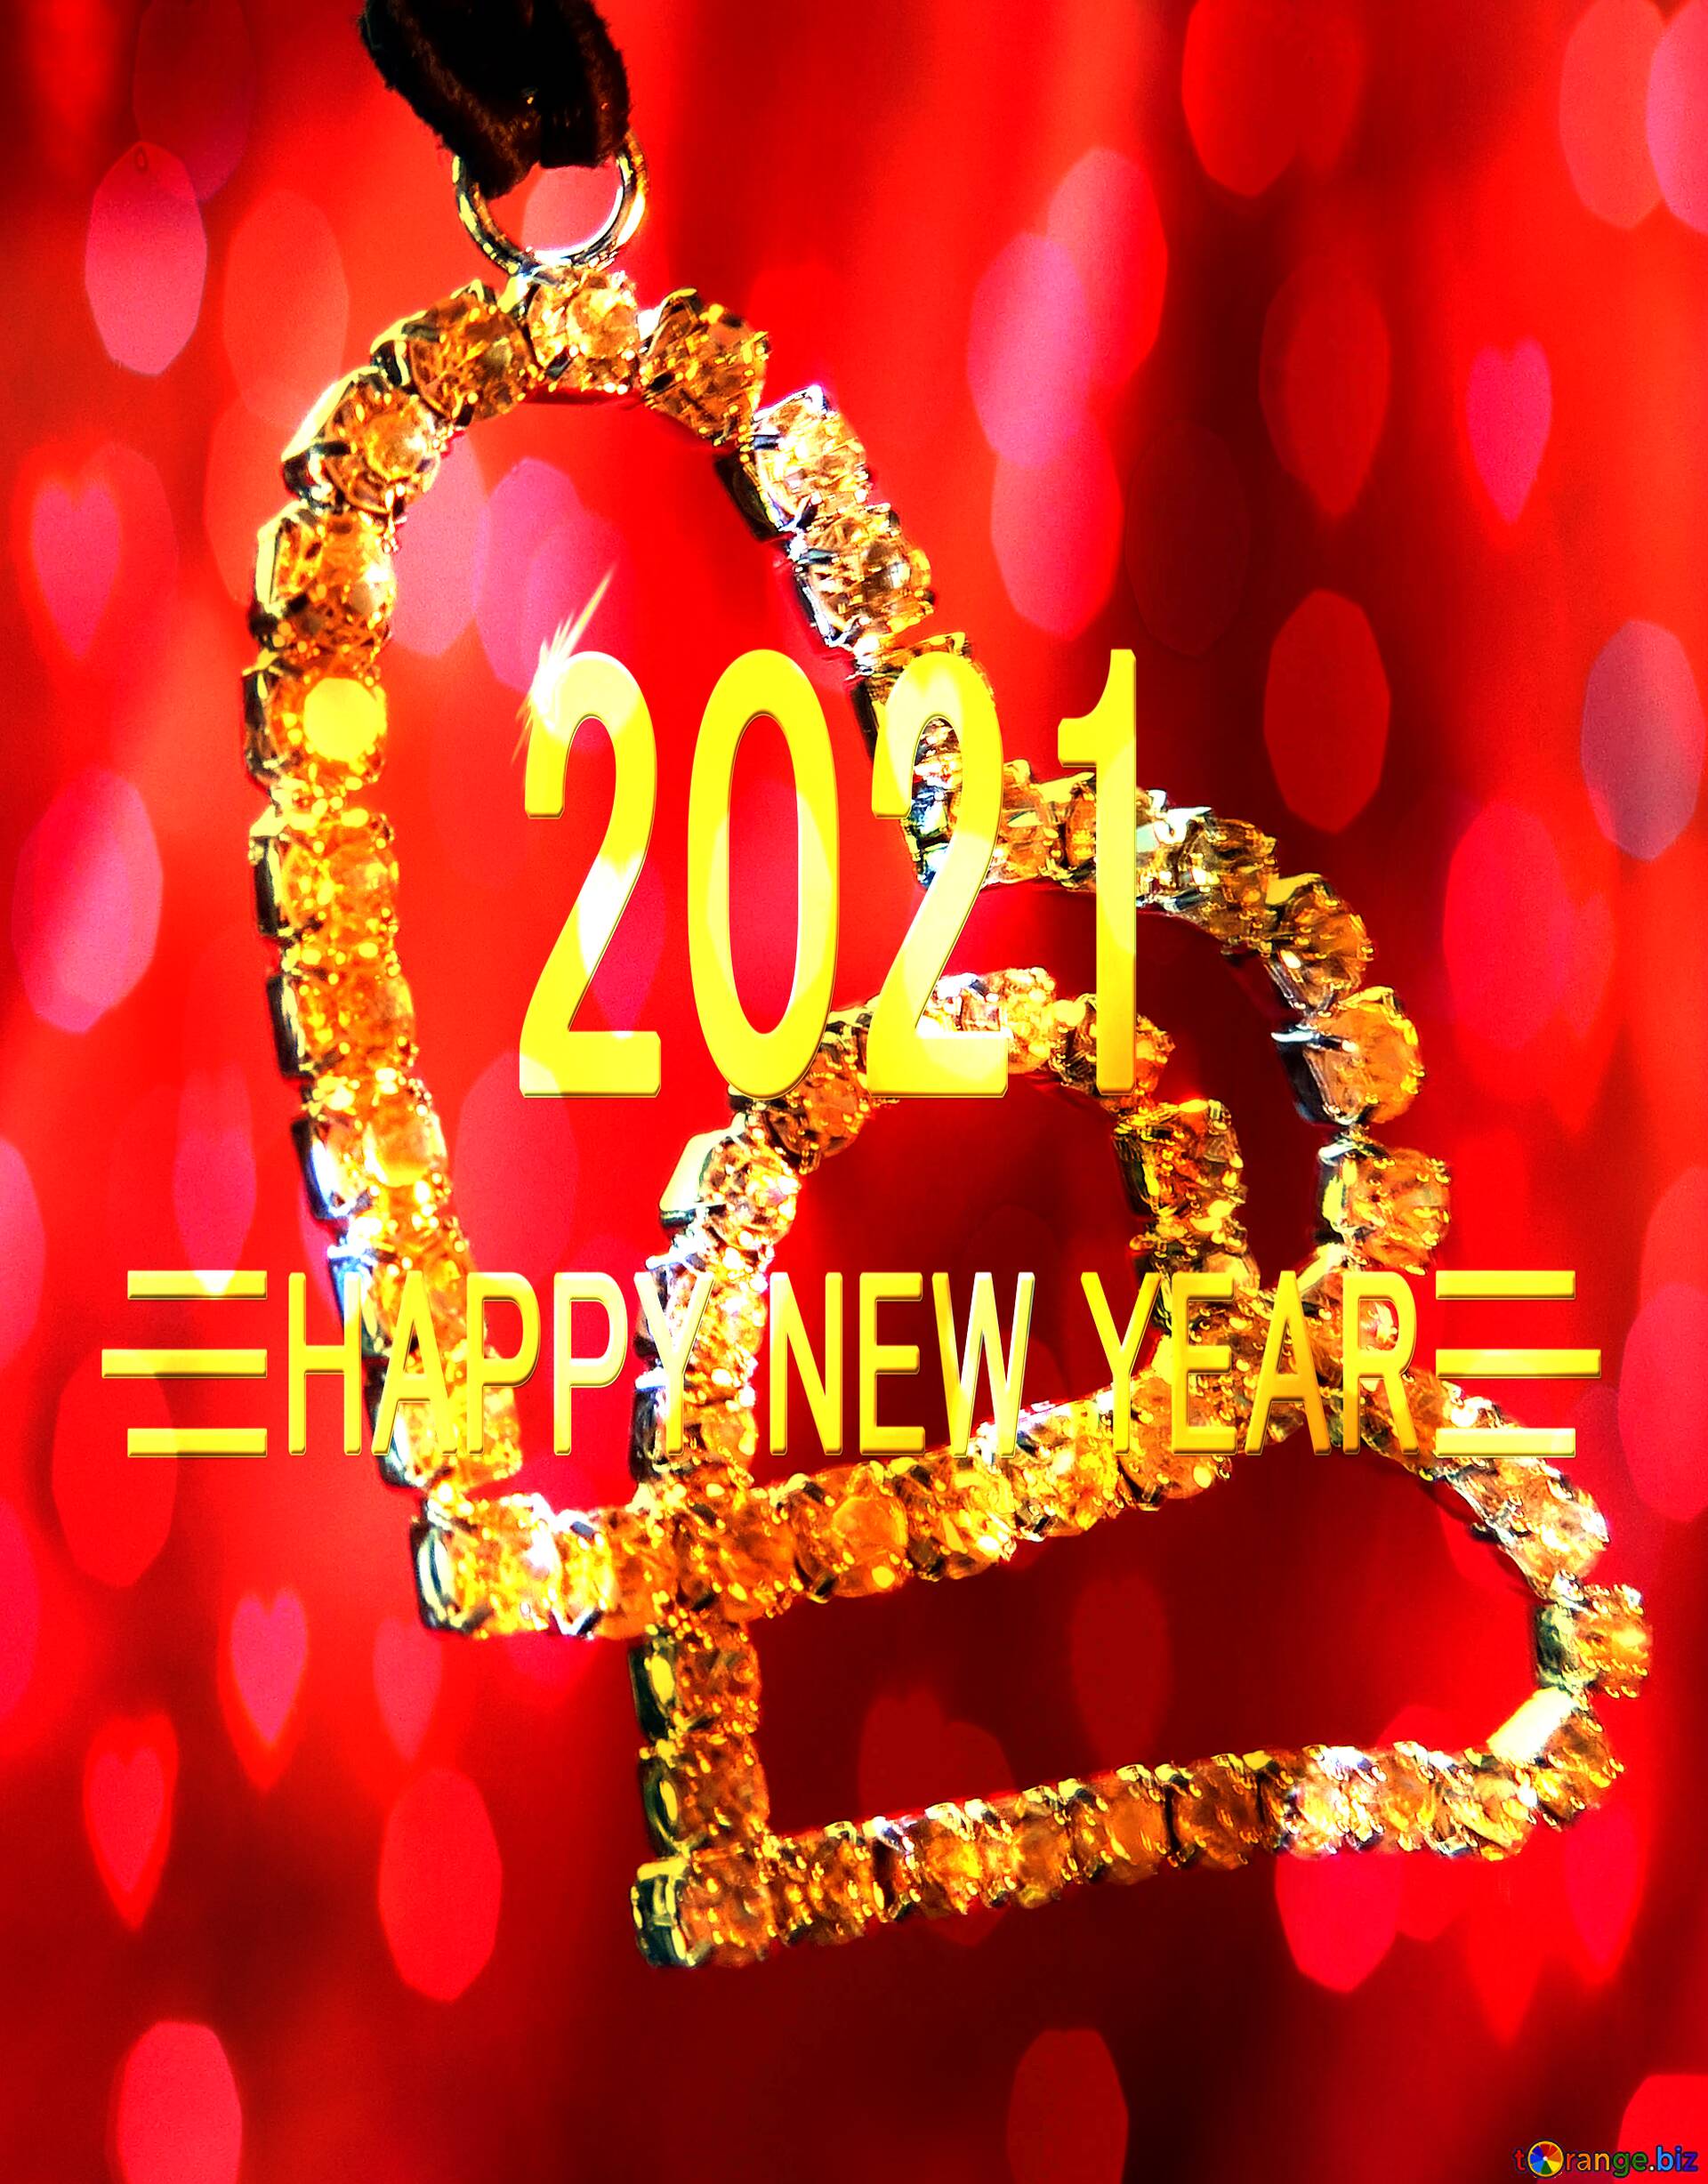 Download free picture Hearts love Card Happy New Year 2021 